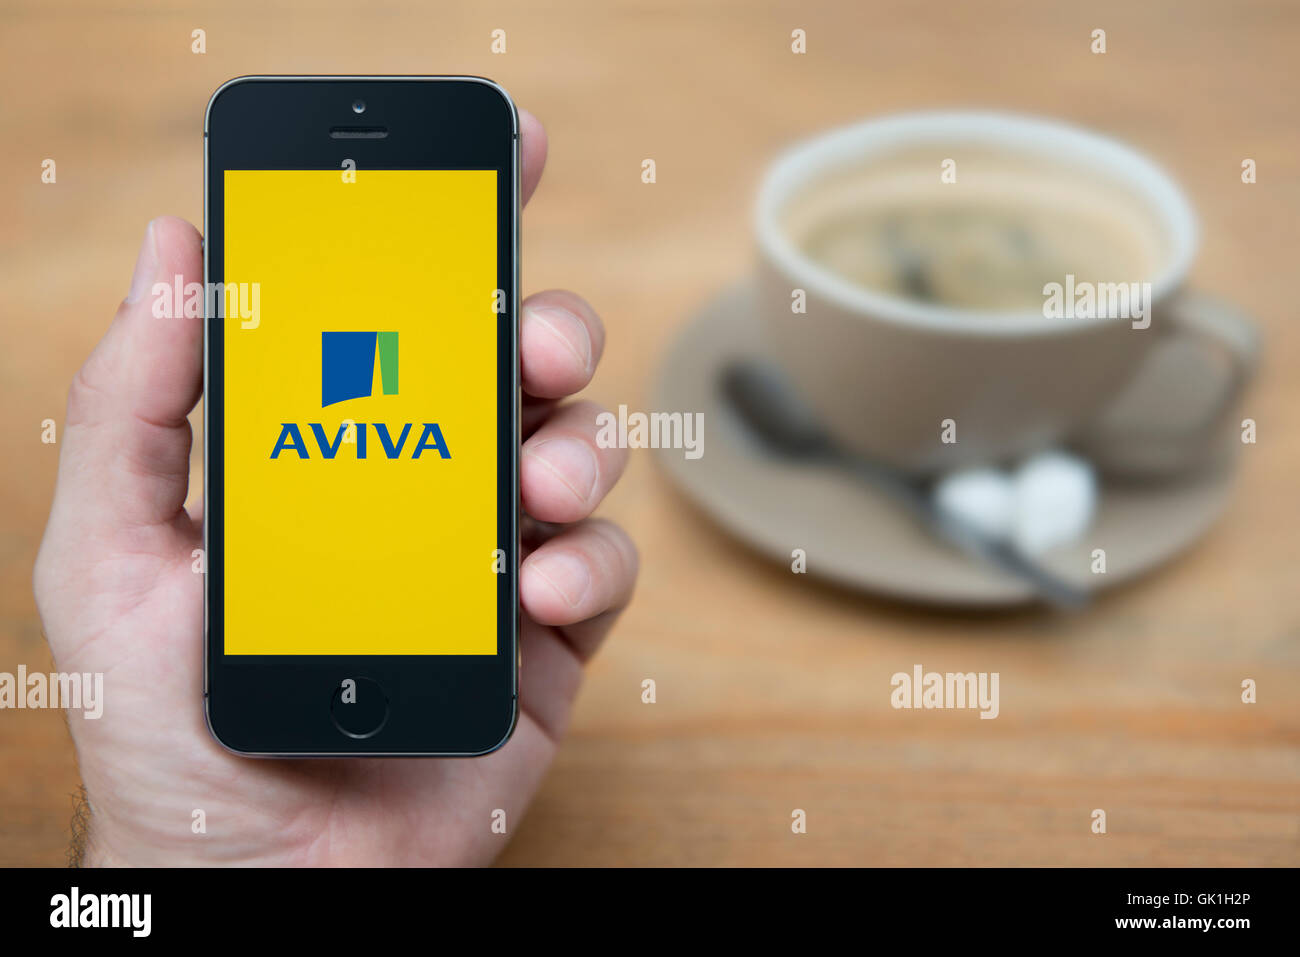 A man looks at his iPhone which displays the Aviva logo, while sat with a cup of coffee (Editorial use only). Stock Photo